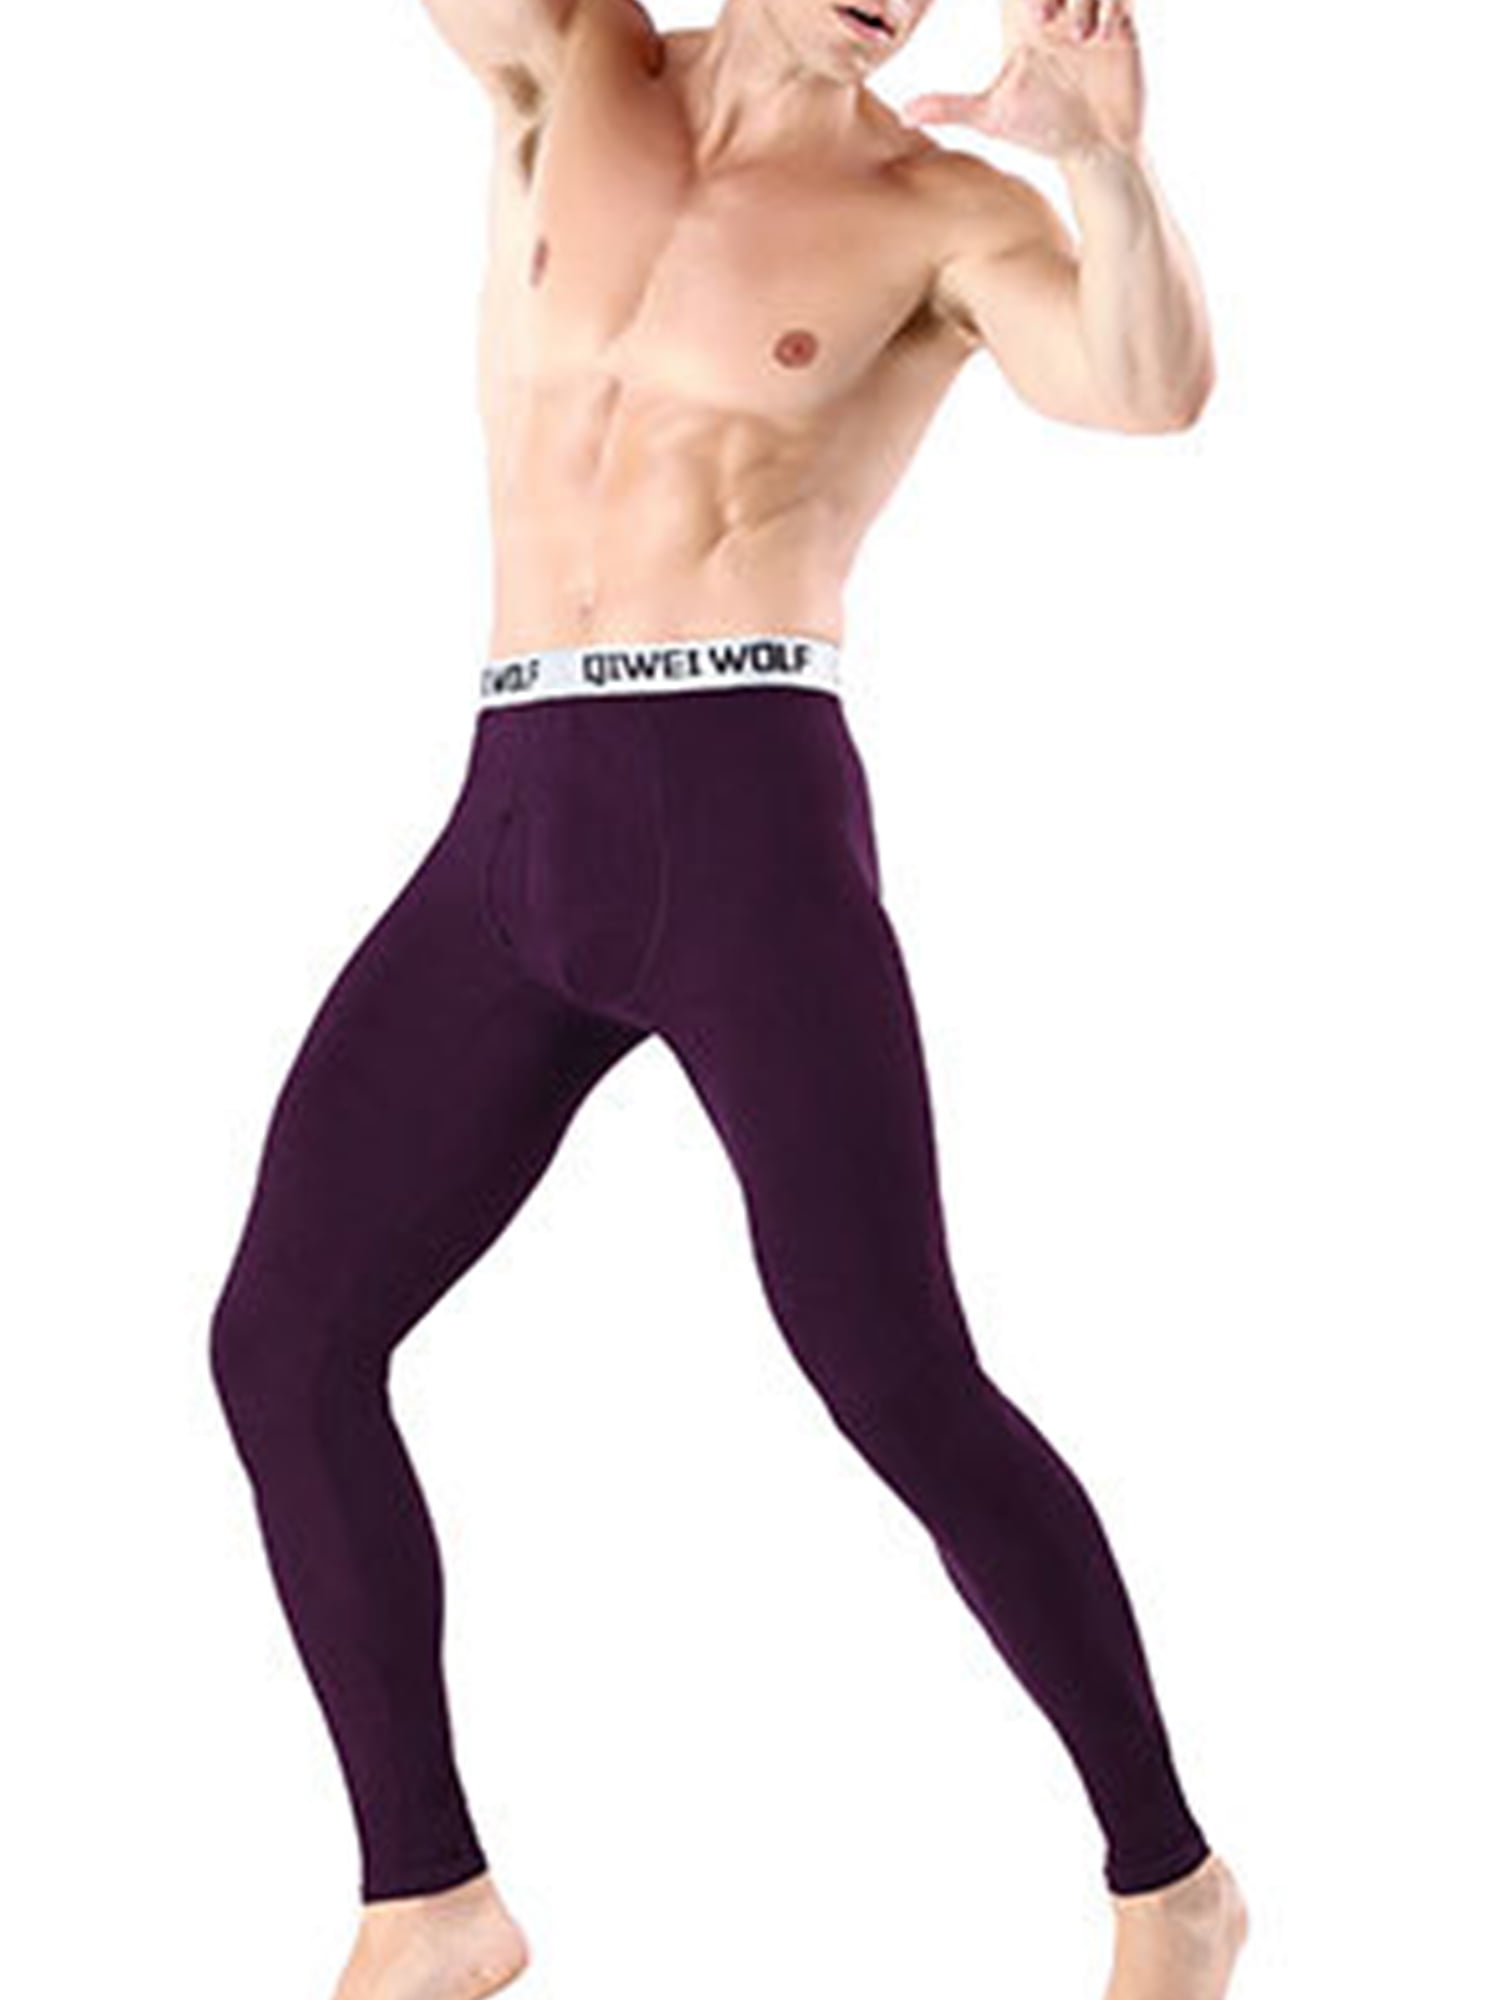 Men's Sportswear Gym Compression Long Pants Running Thermal Base Layer Trousers 